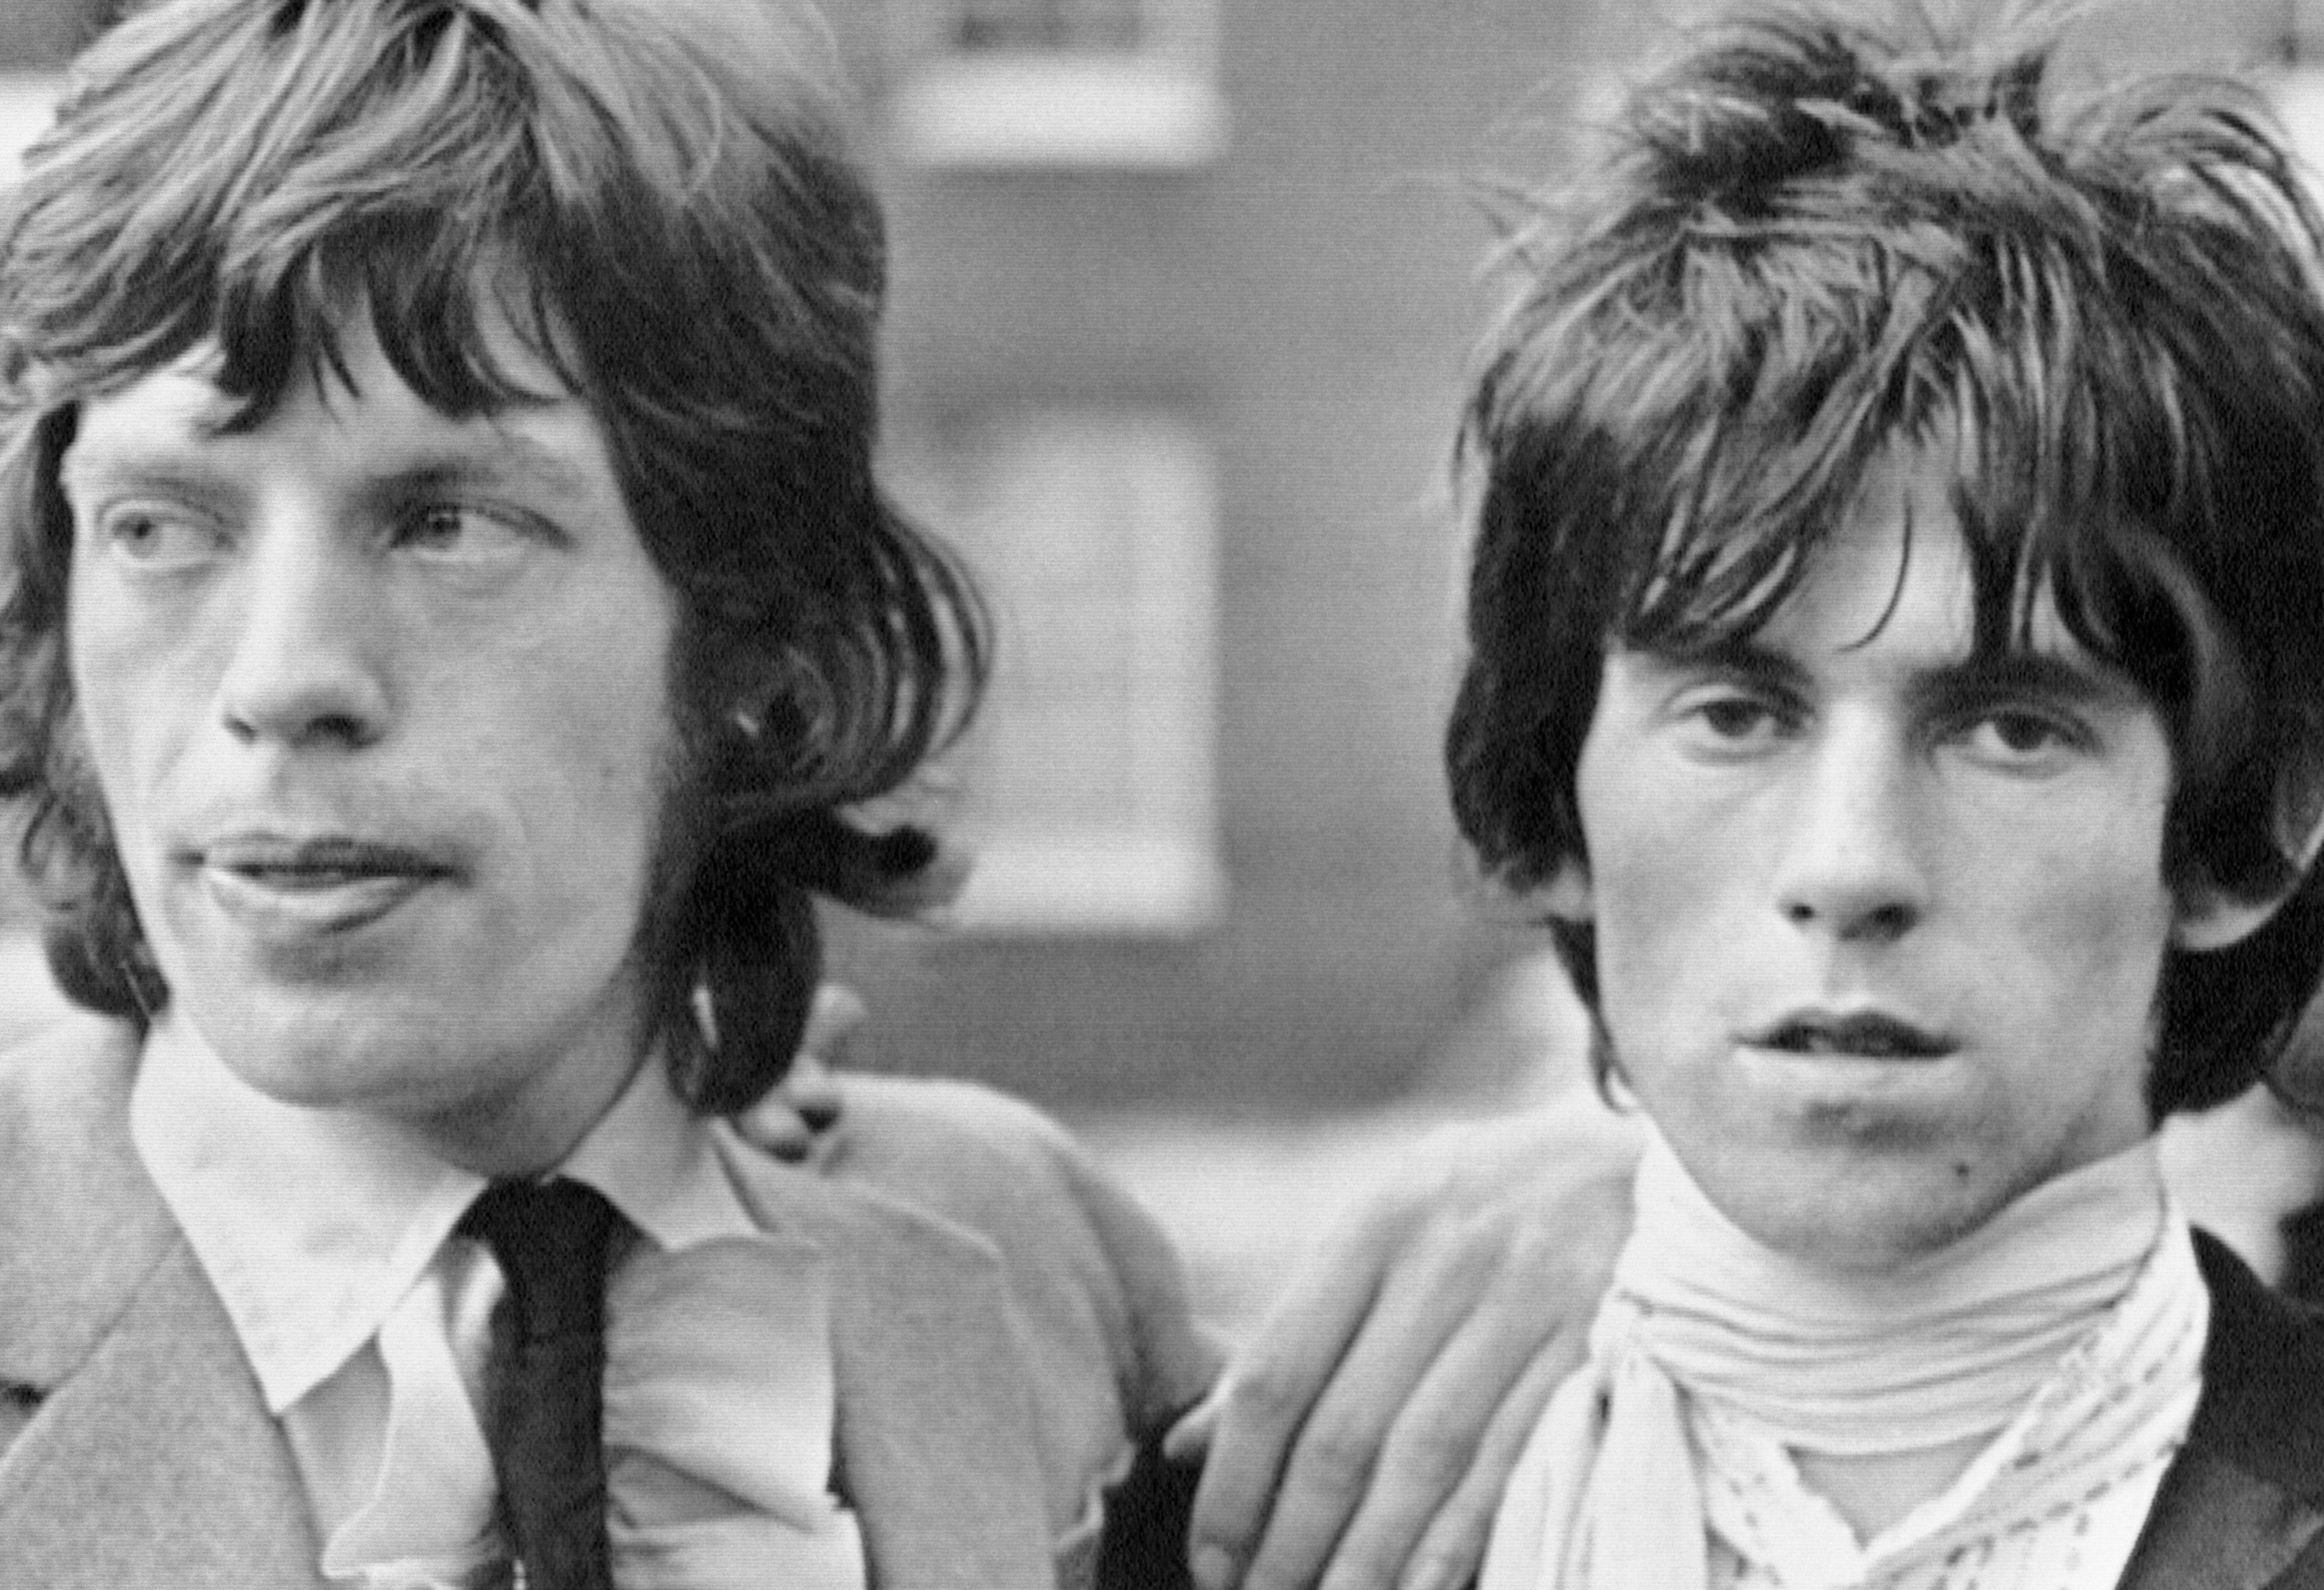 The Rolling Stones' Mick Jagger with his and on Keith Richards' shoulder